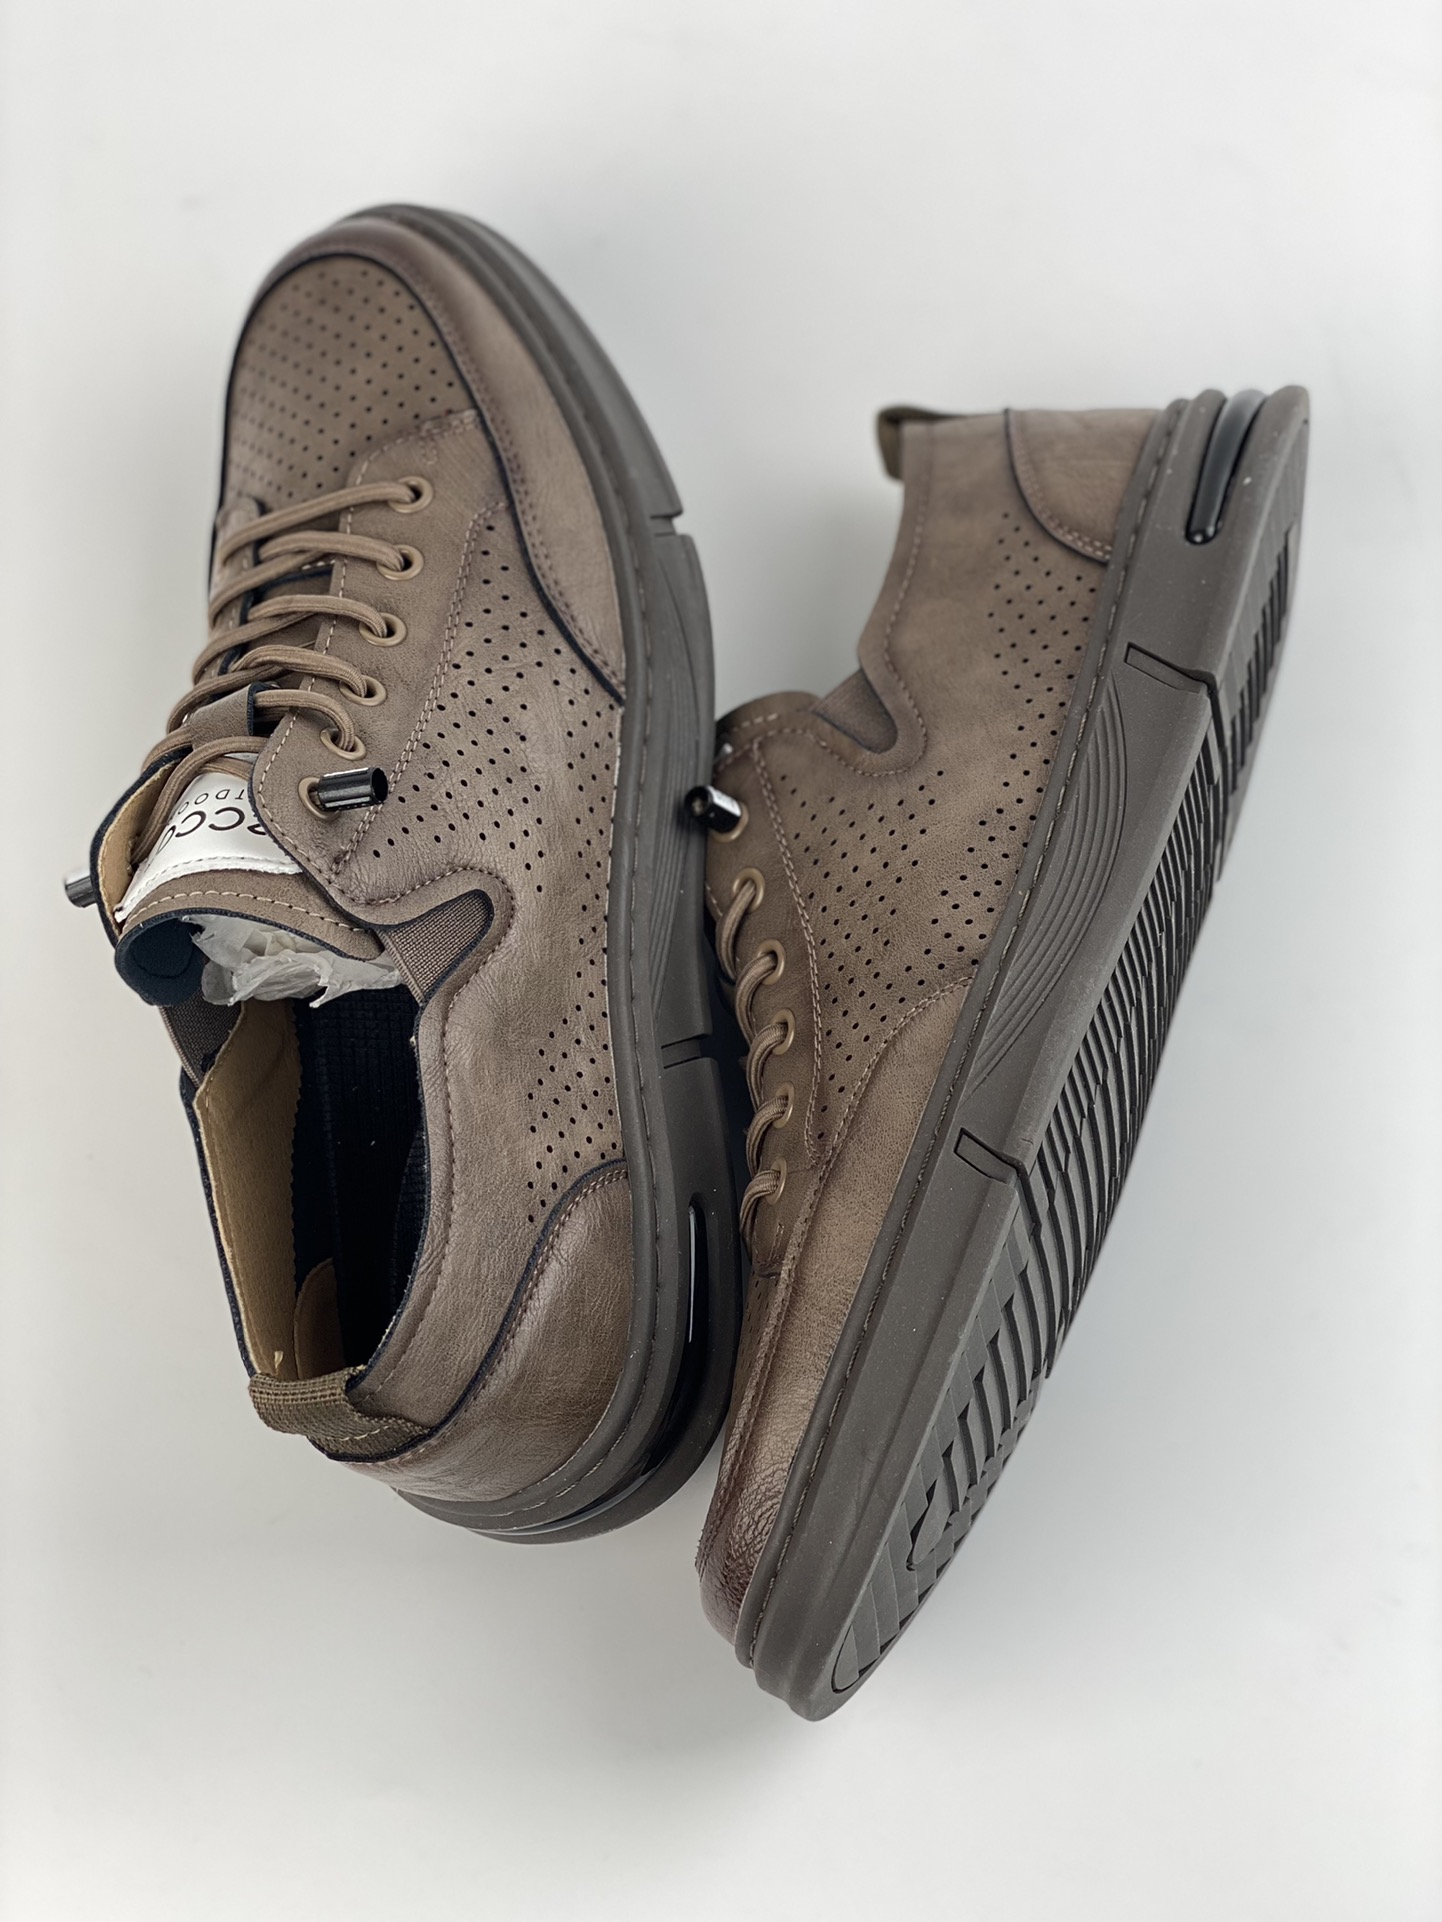 ECCO/ECCO sports running shoes/casual shoes quality steel stamped logo exclusive official website customization